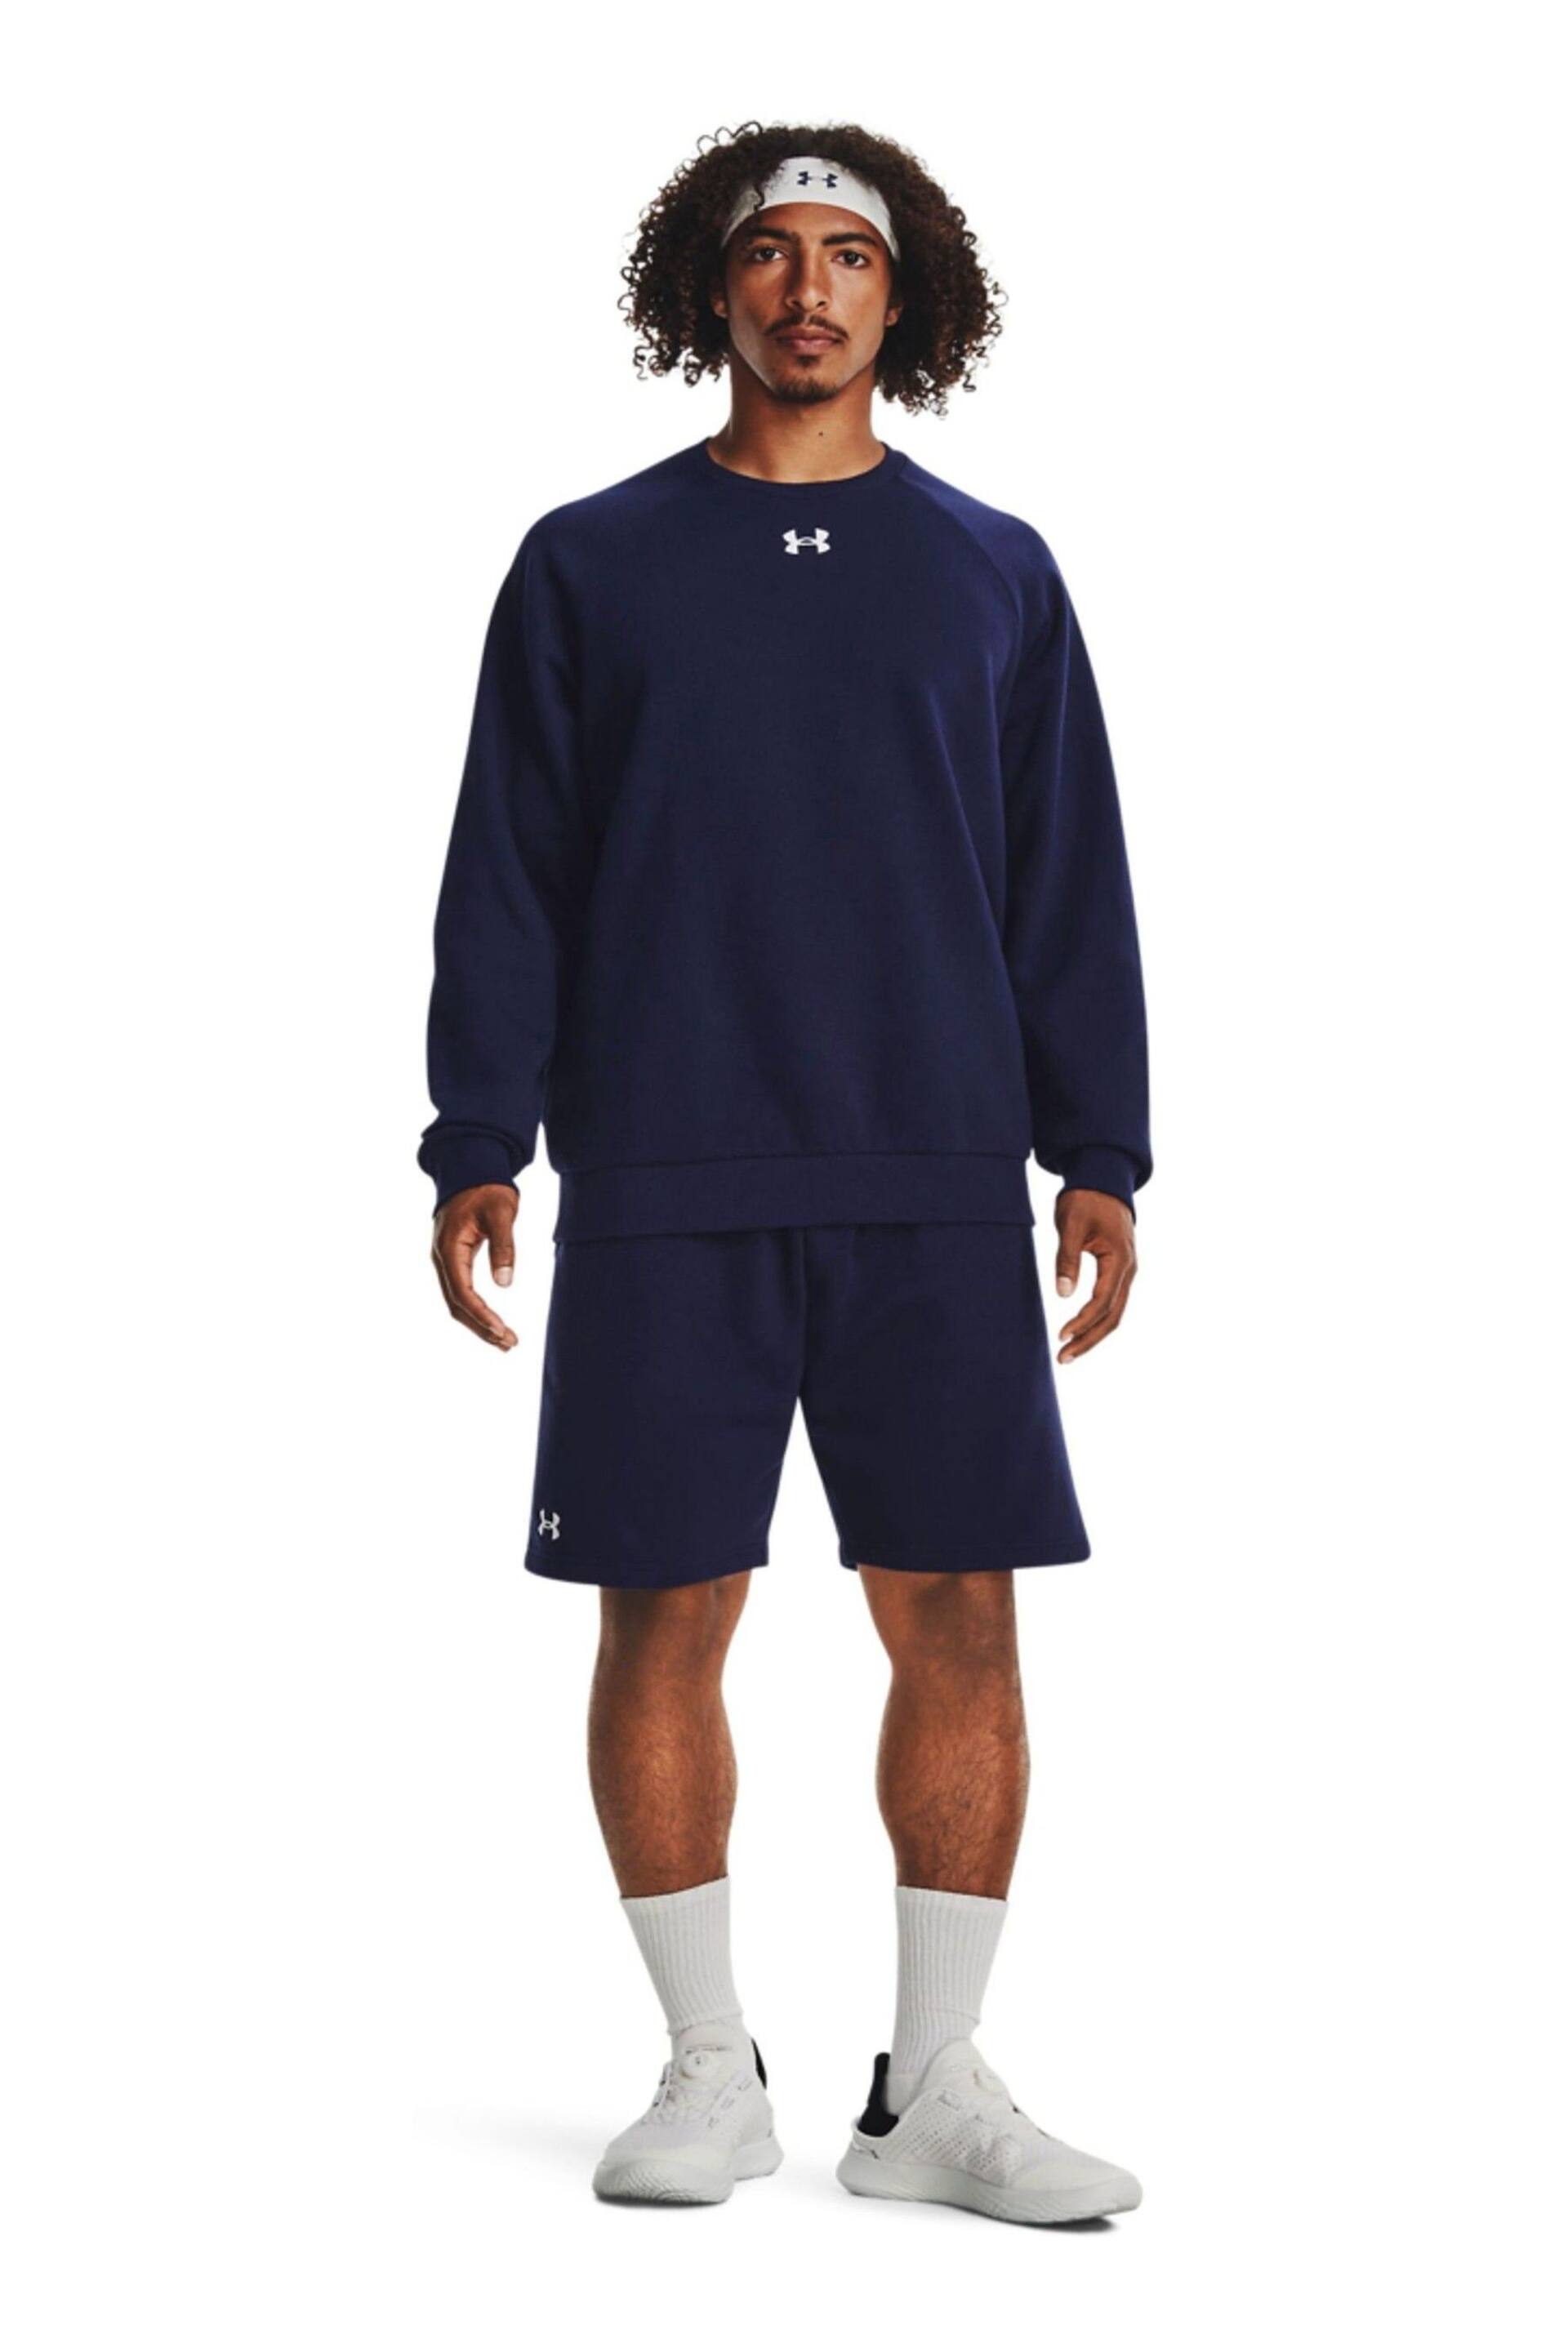 Under Armour Navy Blue/White Rival Fleece Shorts - Image 2 of 6